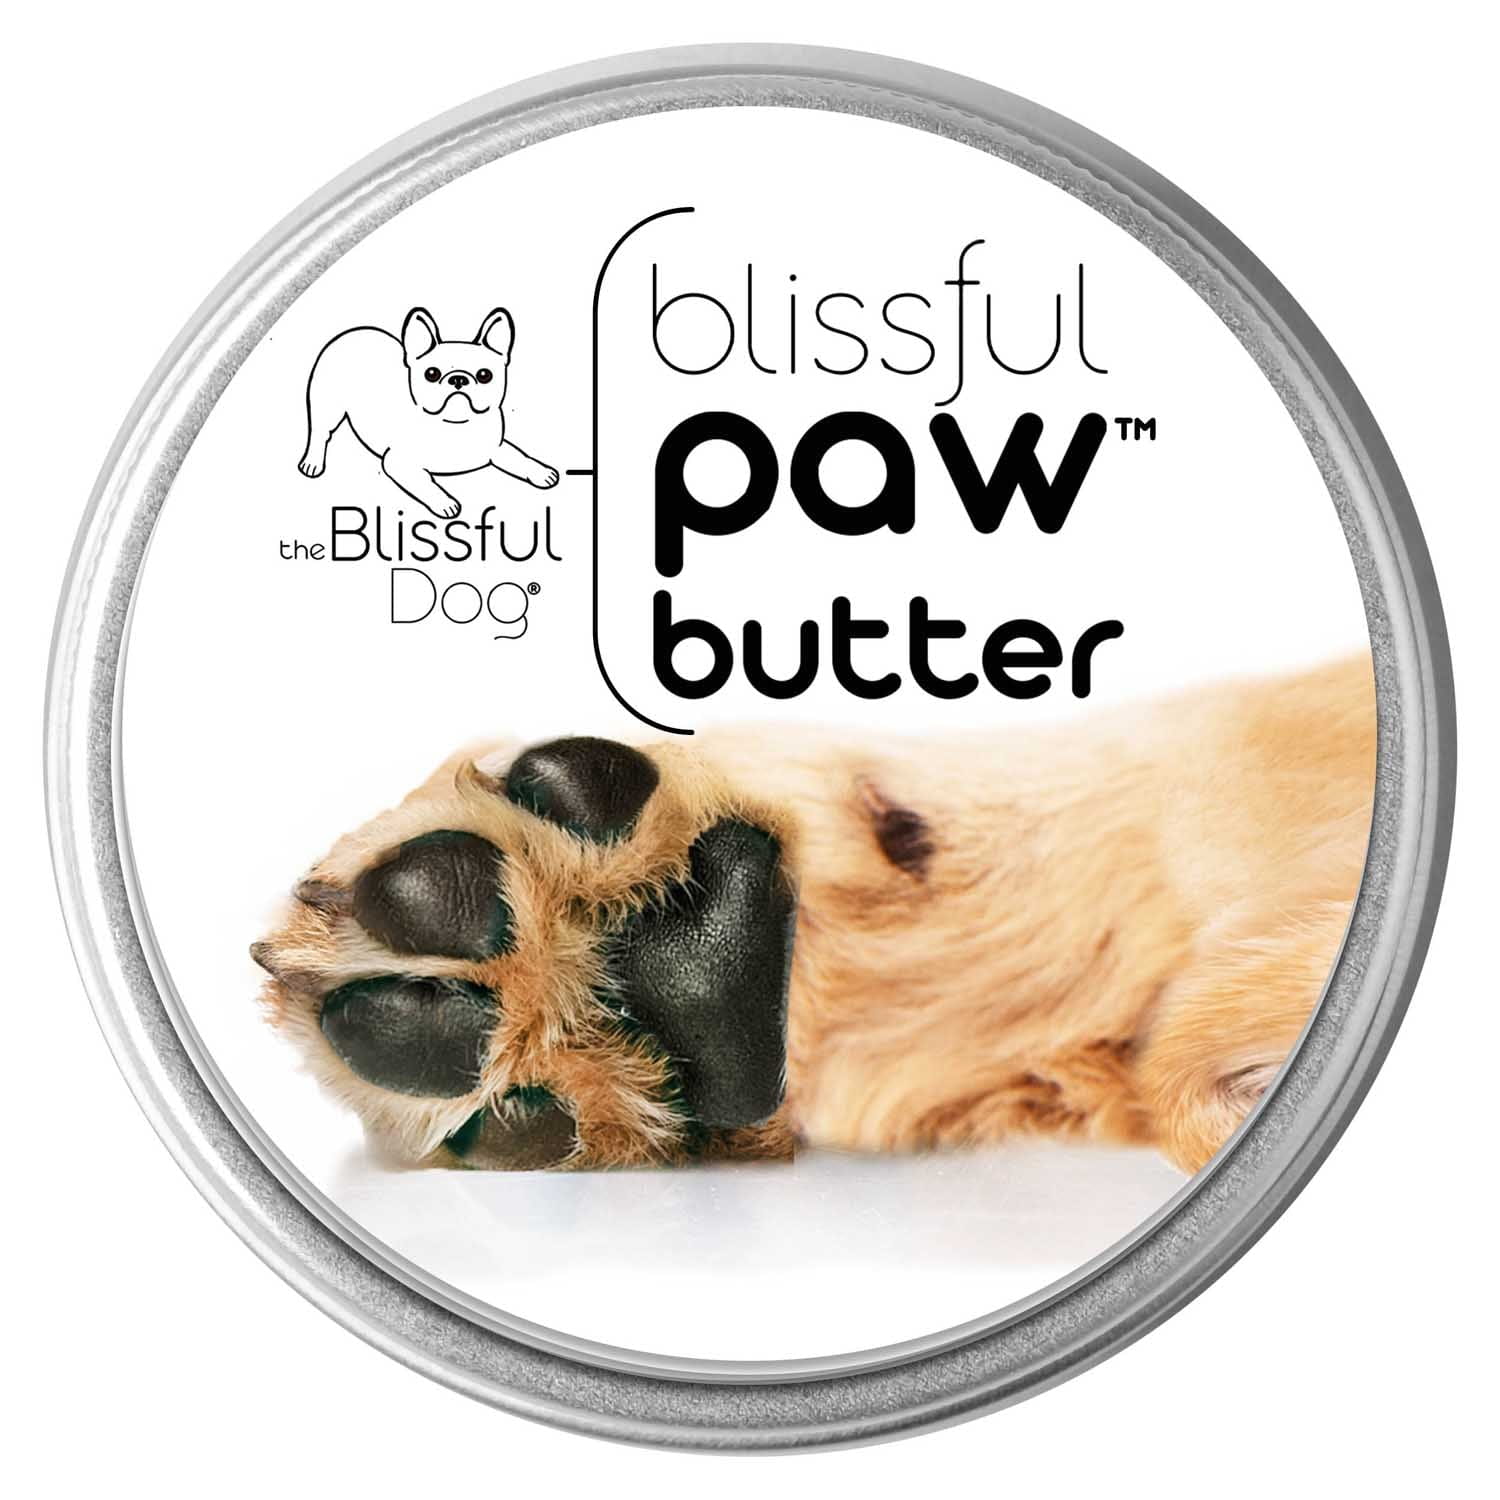 paw butter moisturizes dog paws